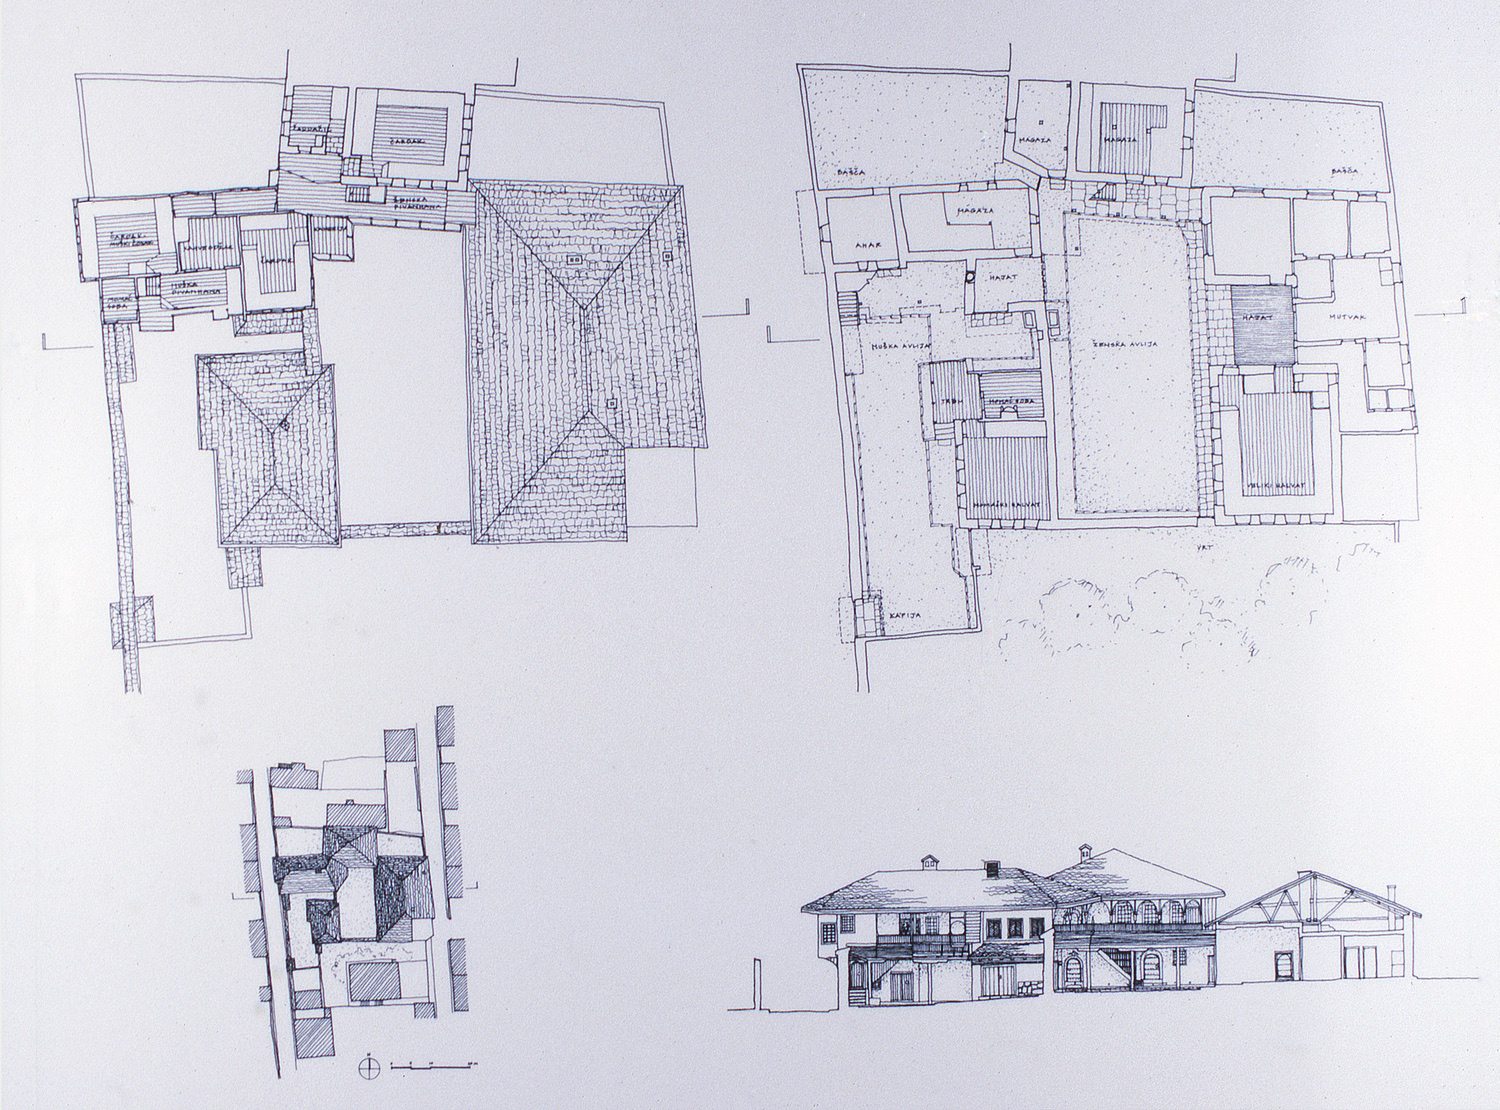 <p>These drawings, developed from more detailed documents, illustrate the buildings and open spaces that make up the complex. The two courtyards (with their long axes north-south) are paved with cobblestones. The two storey buildings contain the selamluk (men's section), on the left of each plan, and the haremluk (women's section), on the right of each plan. Although these sections touch one another, access to the family courtyard is only reached through a single passage (araluk). The narrower courtyard (men's courtyard) is entered from the street. (drawings by authors 1993; data from Sarajevo City Preservation Institute)</p>